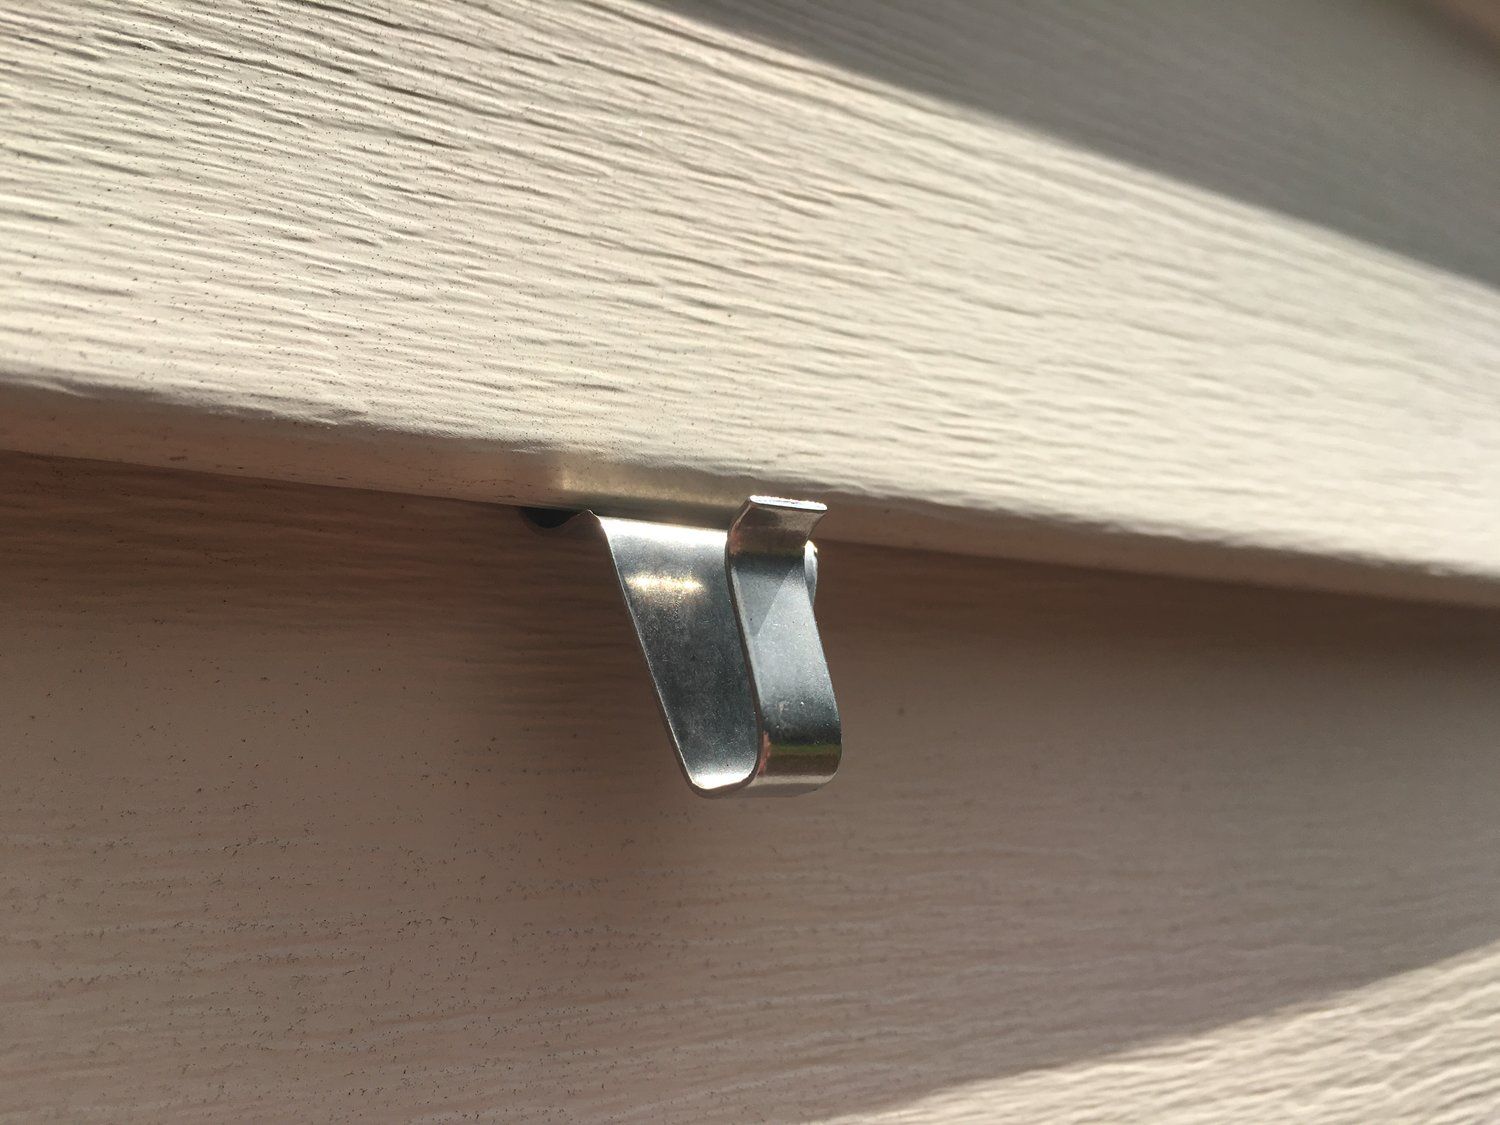 How To Hang Something On Vinyl Siding